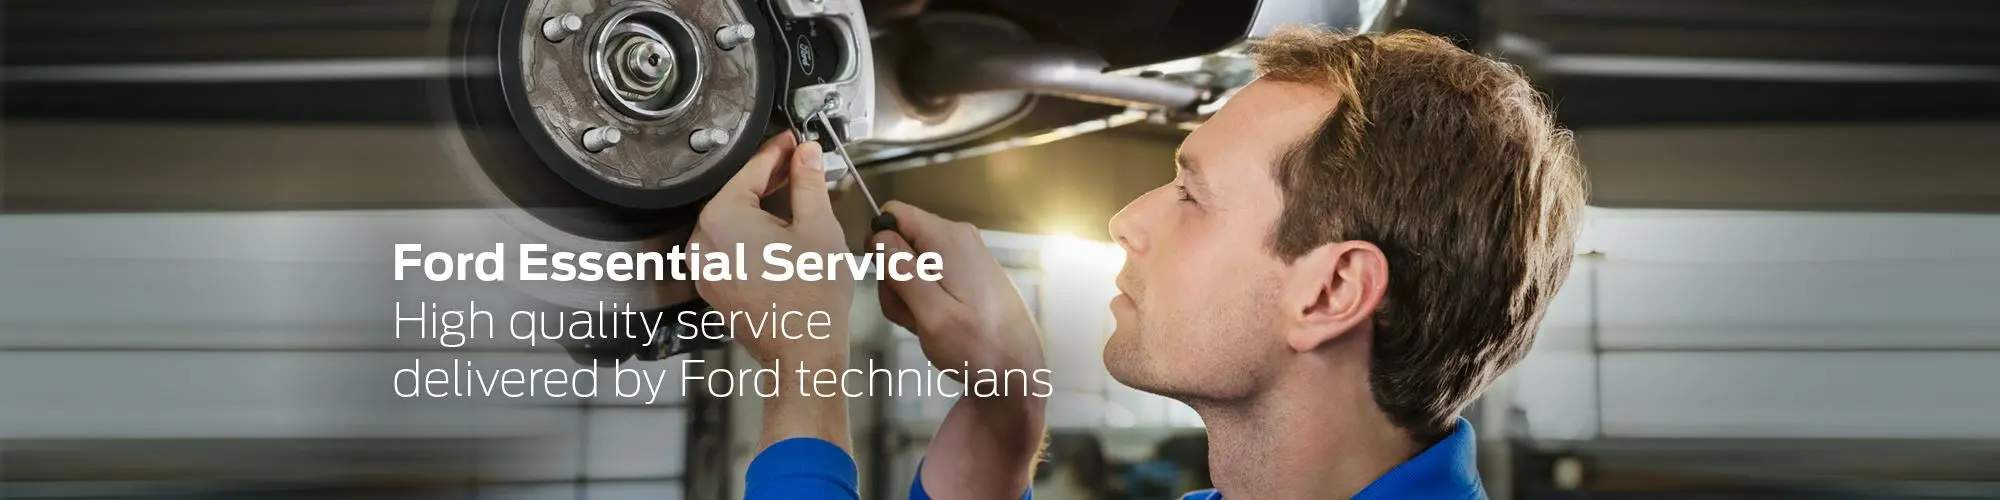 Ford Essential Service at Ames Ford Thetford, Norfolk